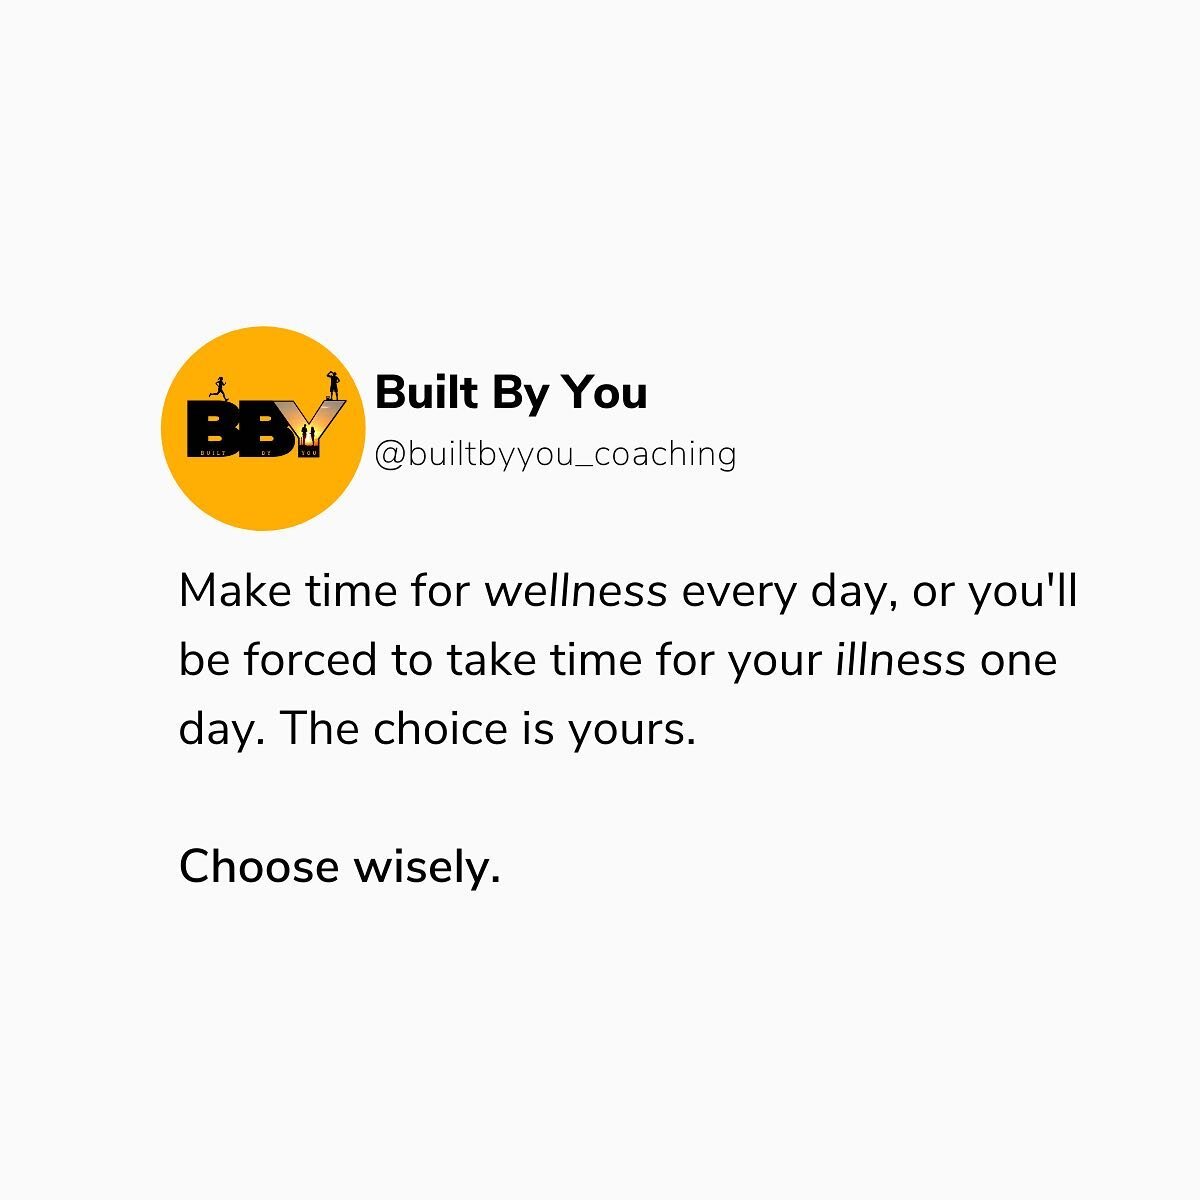 Prioritise You &amp; Your health! 

This is your lunch time reminder to do something today that your future self will thank you for. 

Exercise reduces stress which reduces hormones that cause inflammation. It lowers blood pressure, regulates our blo